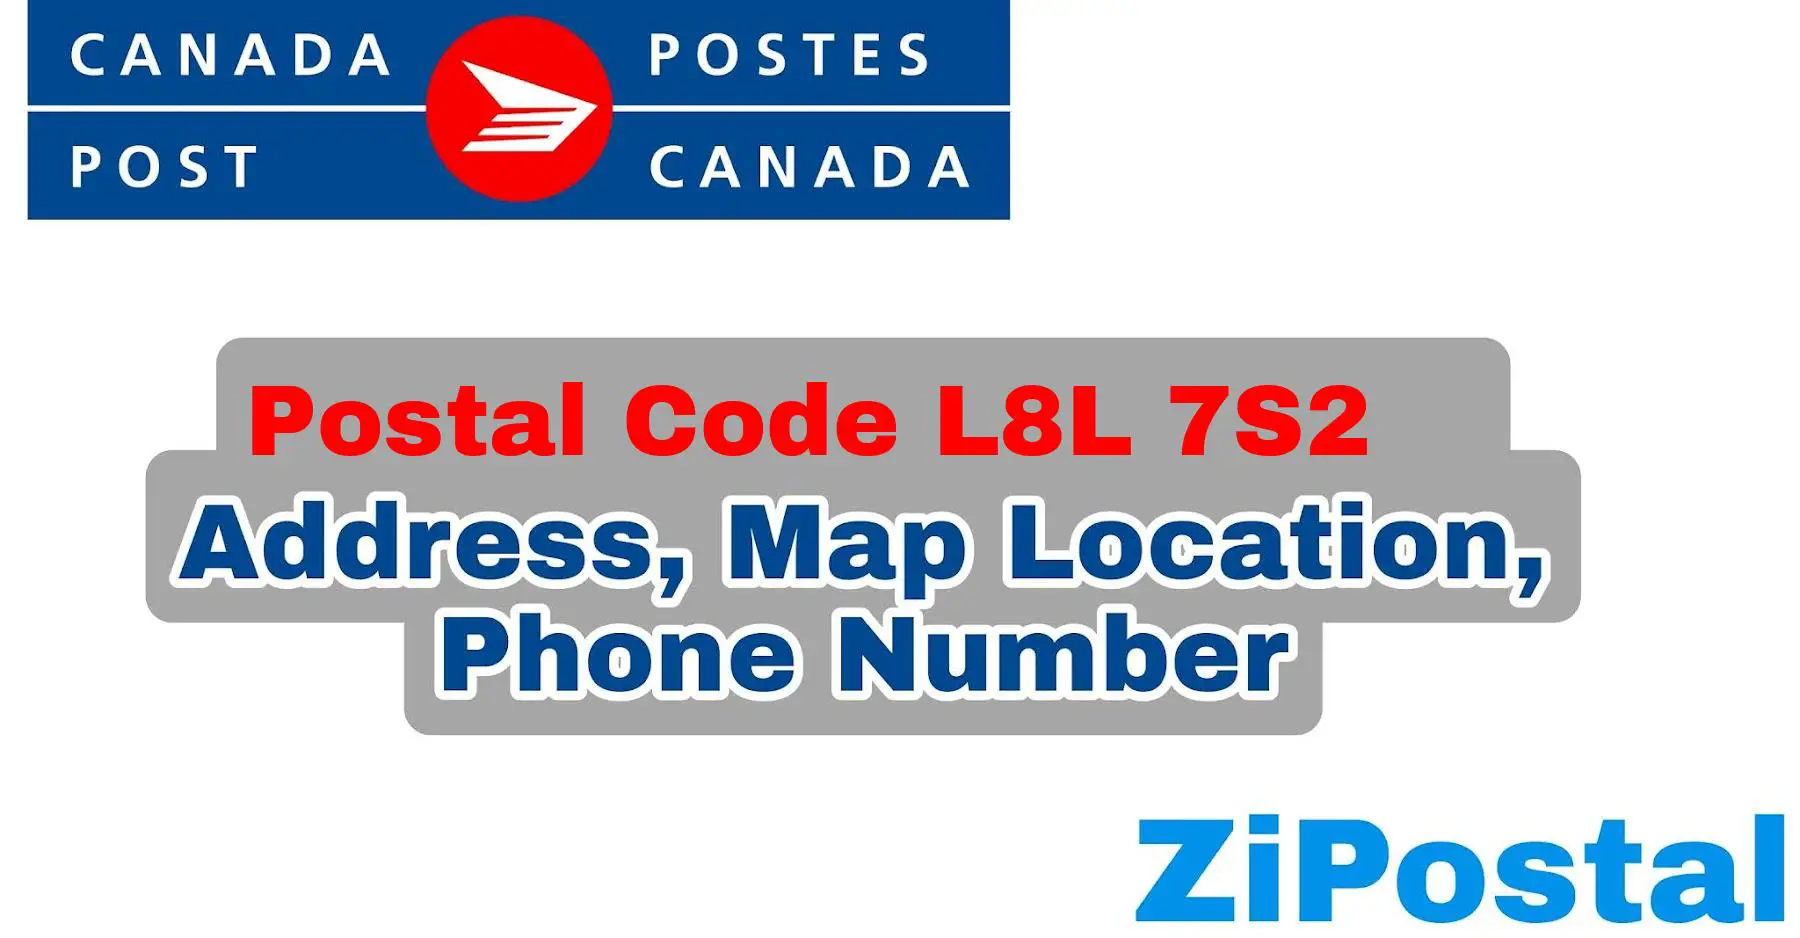 Postal Code L8L 7S2 Address Map Location and Phone Number